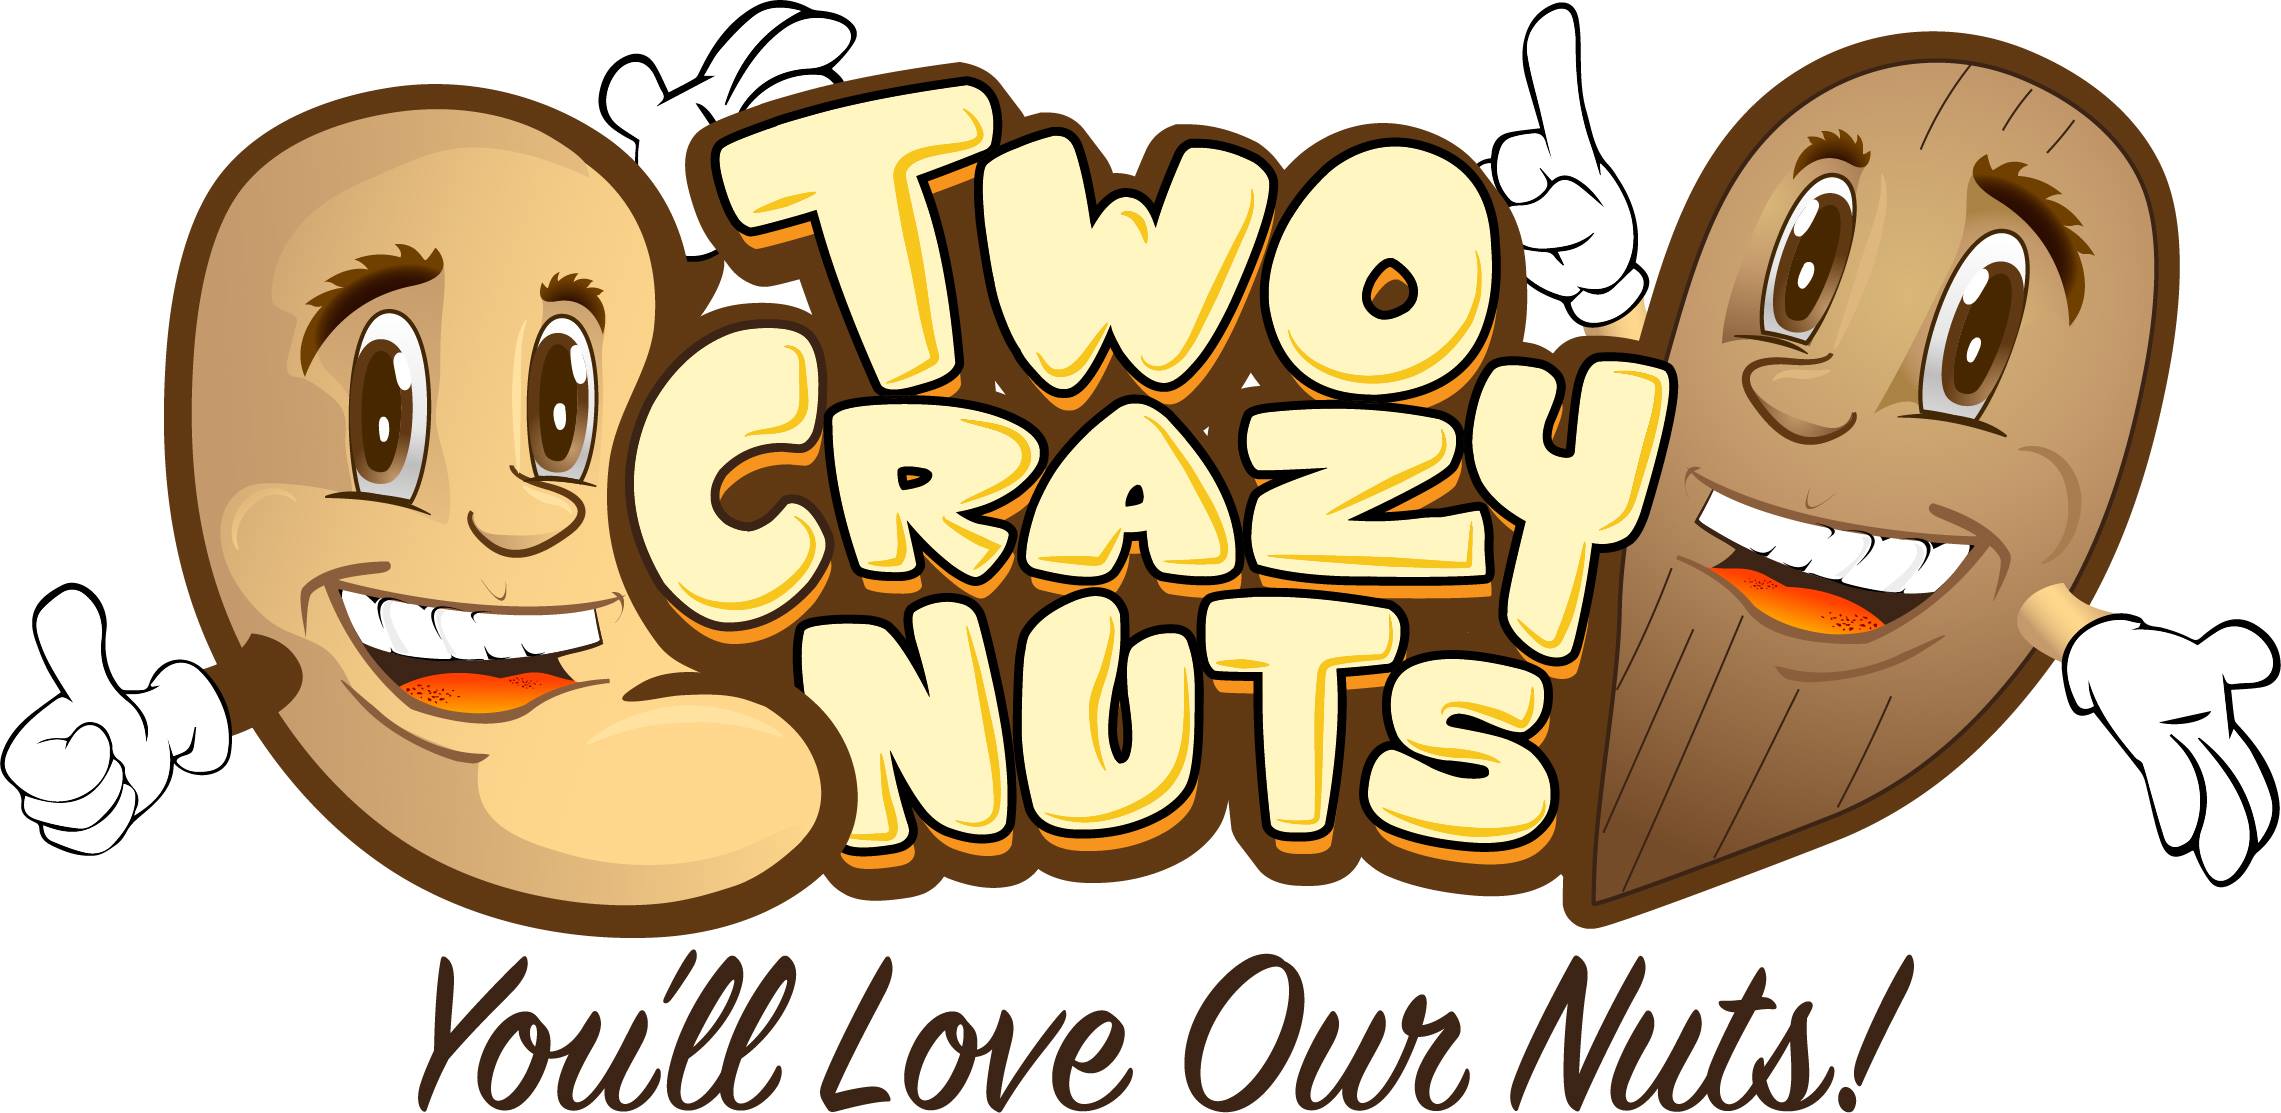 Two Crazy Nuts